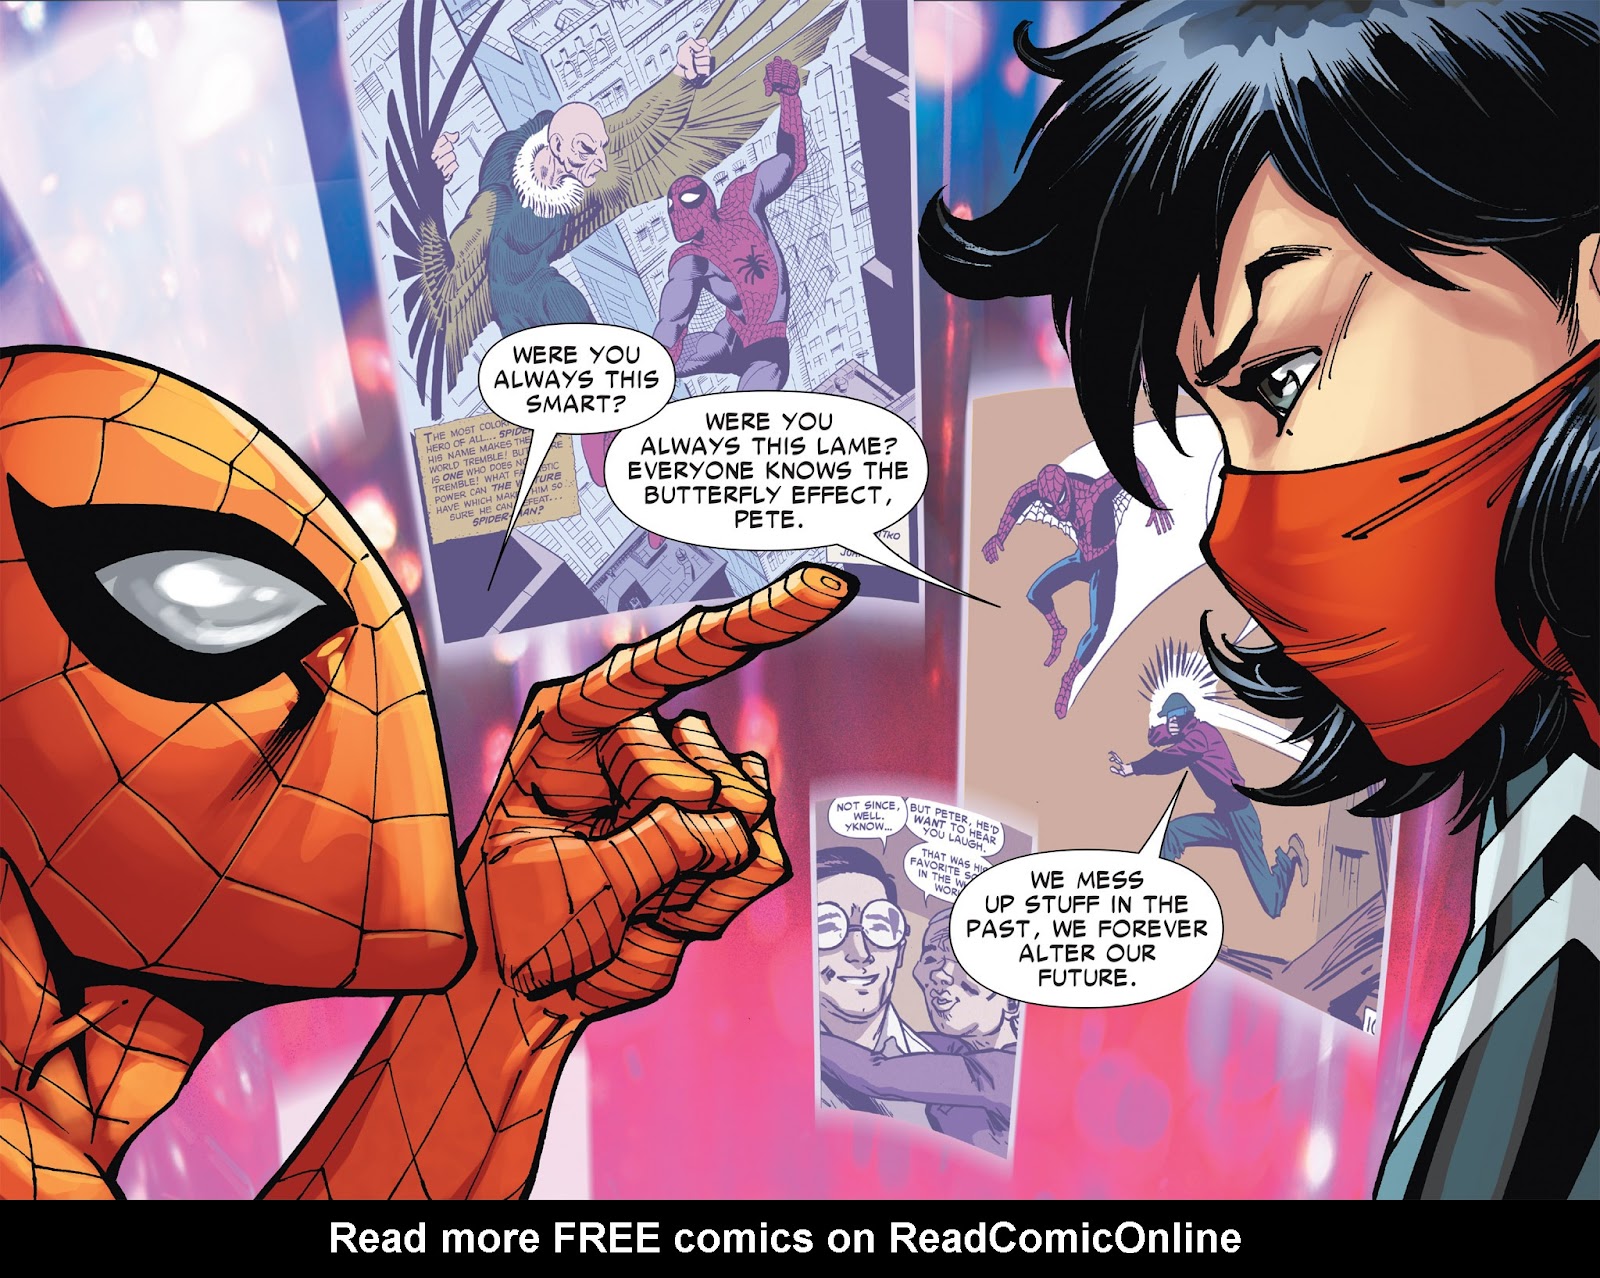 The Amazing Spider-Man & Silk: The Spider(fly) Effect (Infinite Comics) issue 1 - Page 43